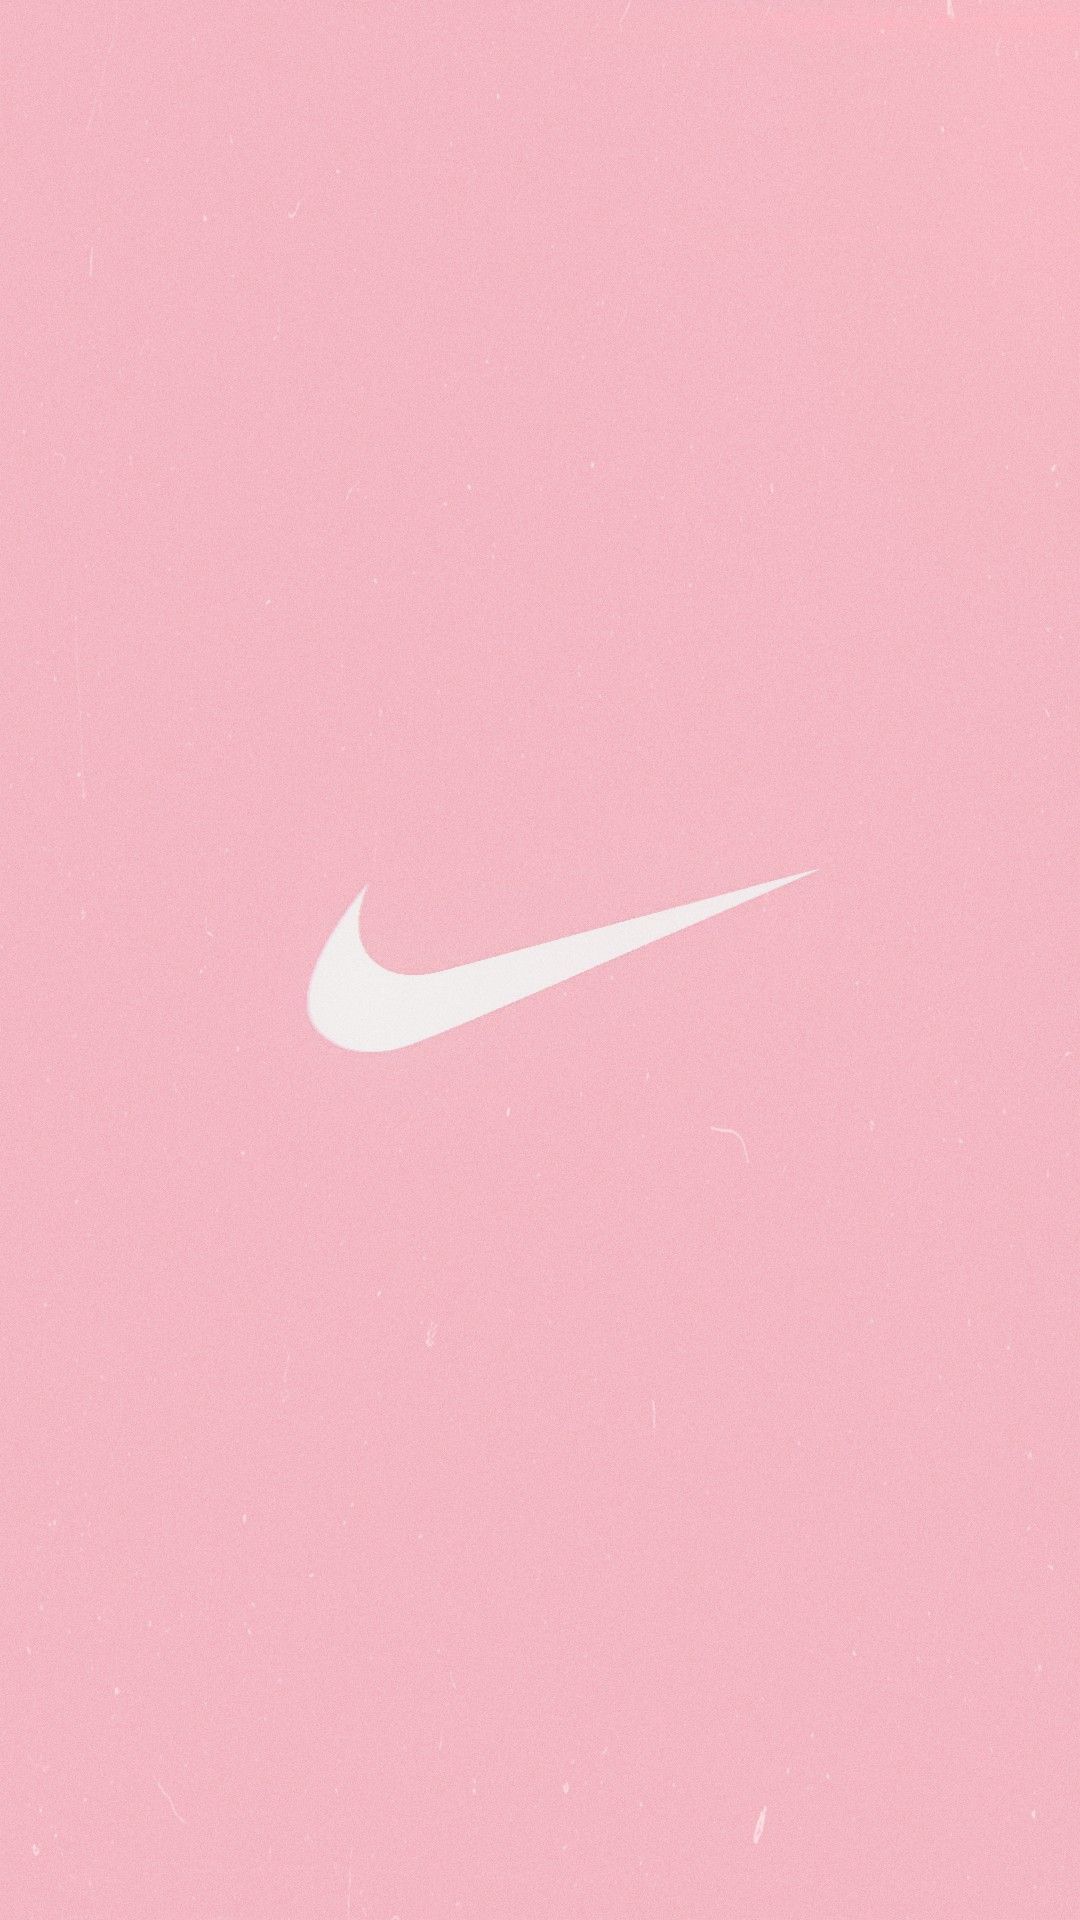 Aesthetic Nike Wallpaper for iPhone with high-resolution 1080x1920 pixel. You can use this wallpaper for your iPhone 5, 6, 7, 8, X, XS, XR backgrounds, Mobile Screensaver, or iPad Lock Screen - Nike